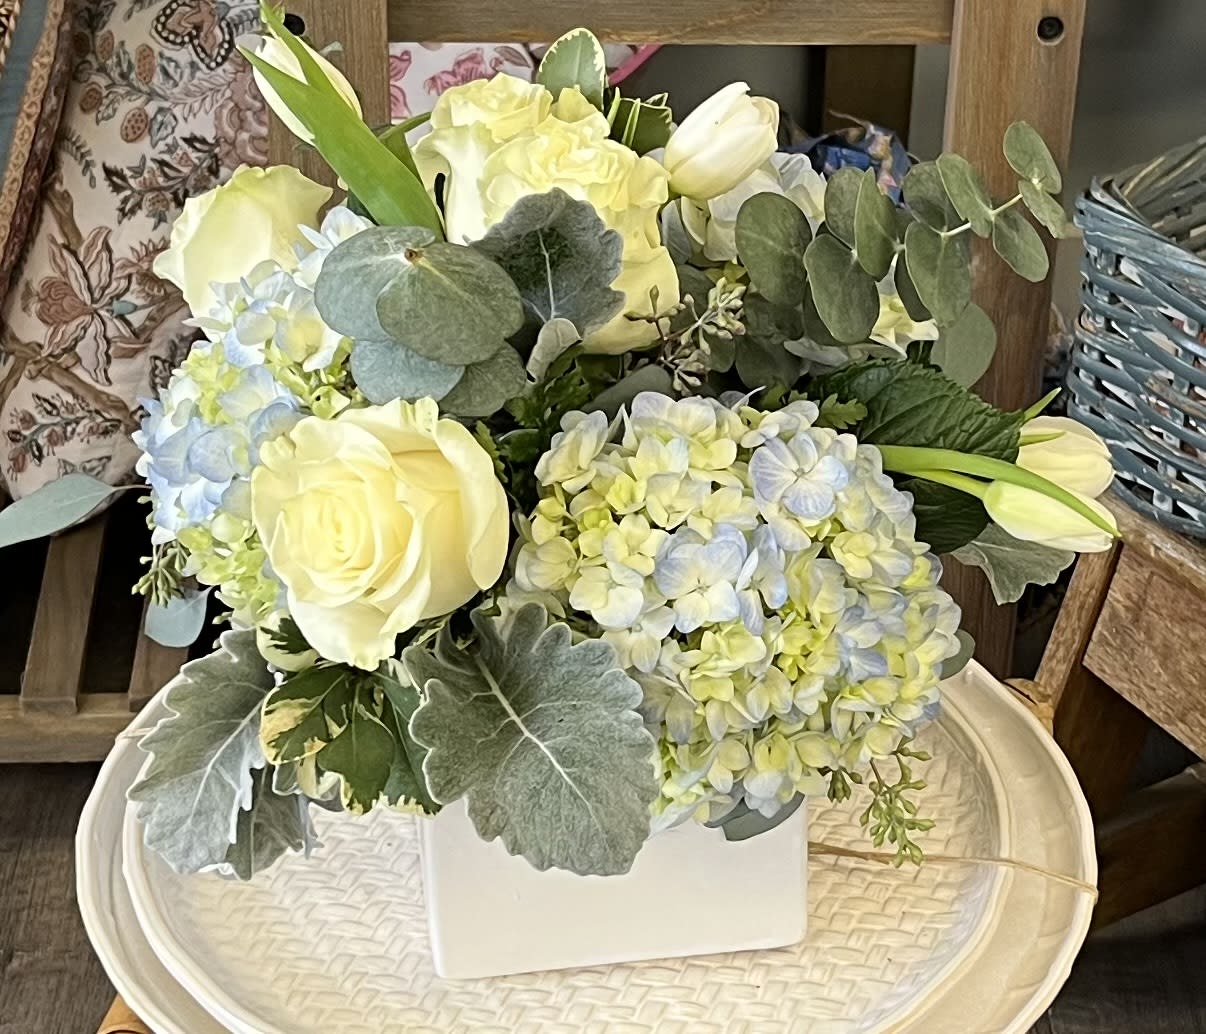 Simplicity - This arrangement includes blue hydrangea, white roses and tulips.